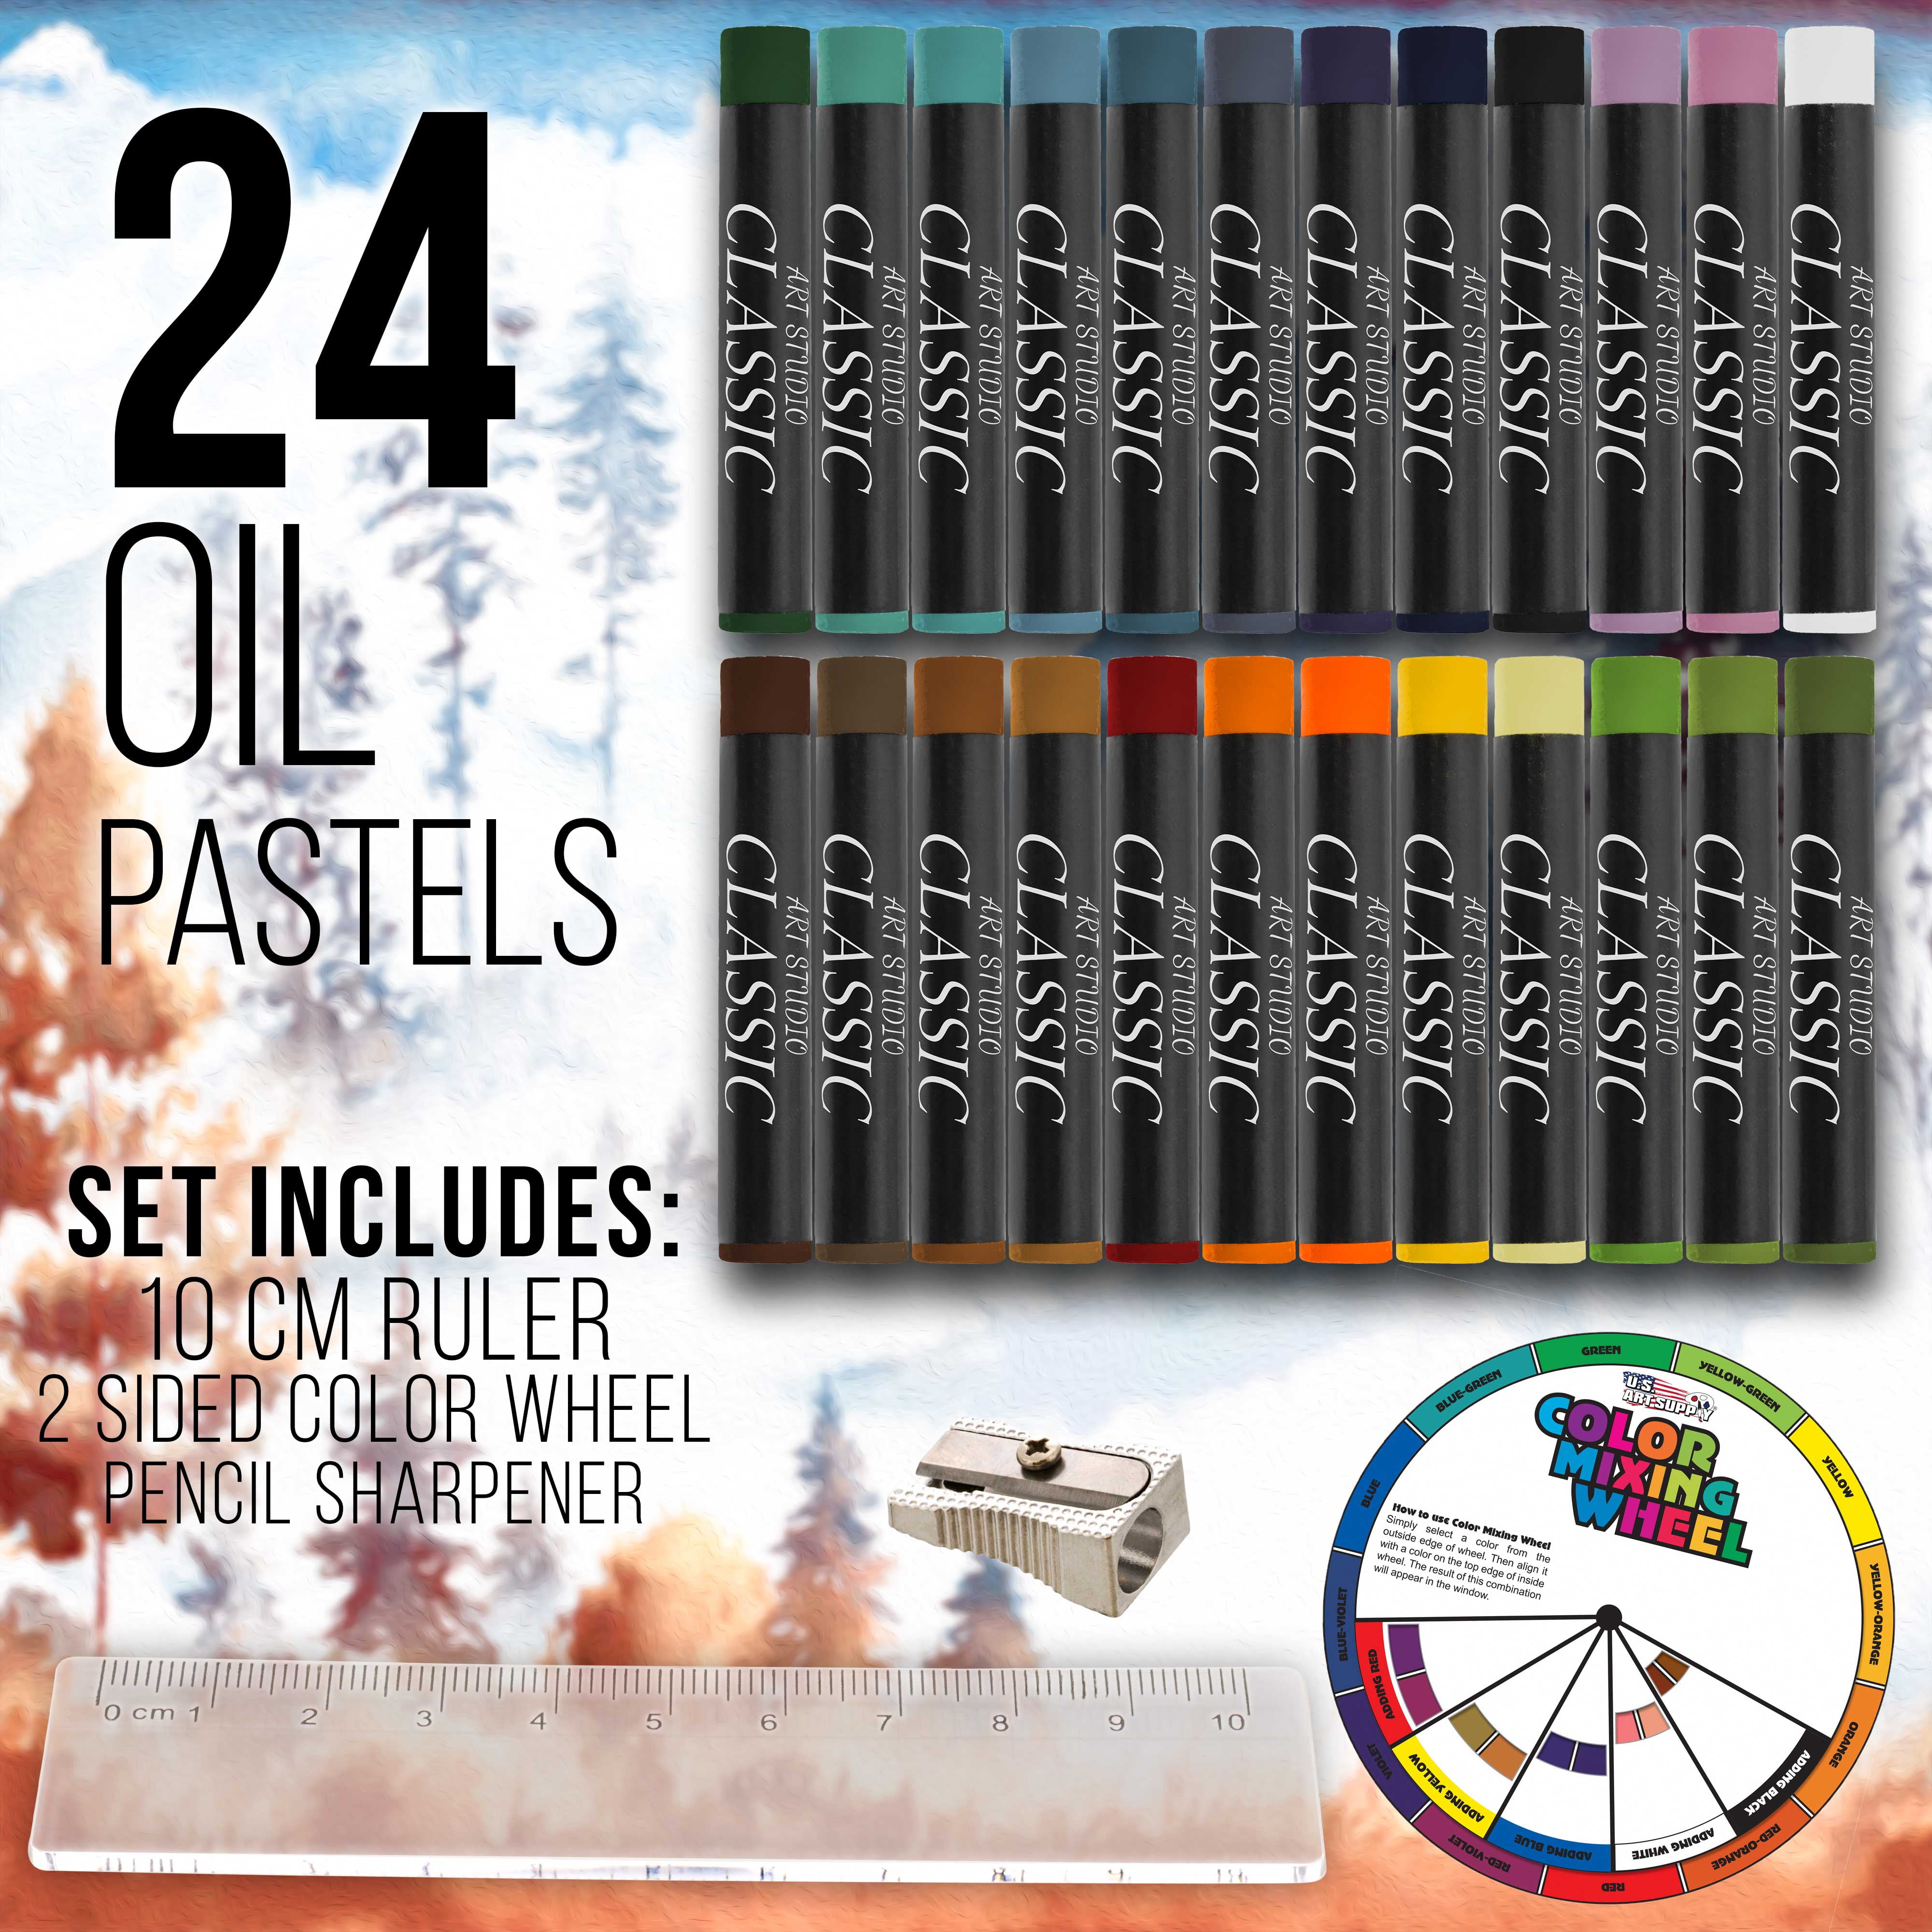 162-Piece Deluxe Mega Wood Box Art, Painting & Drawing Set — TCP Global